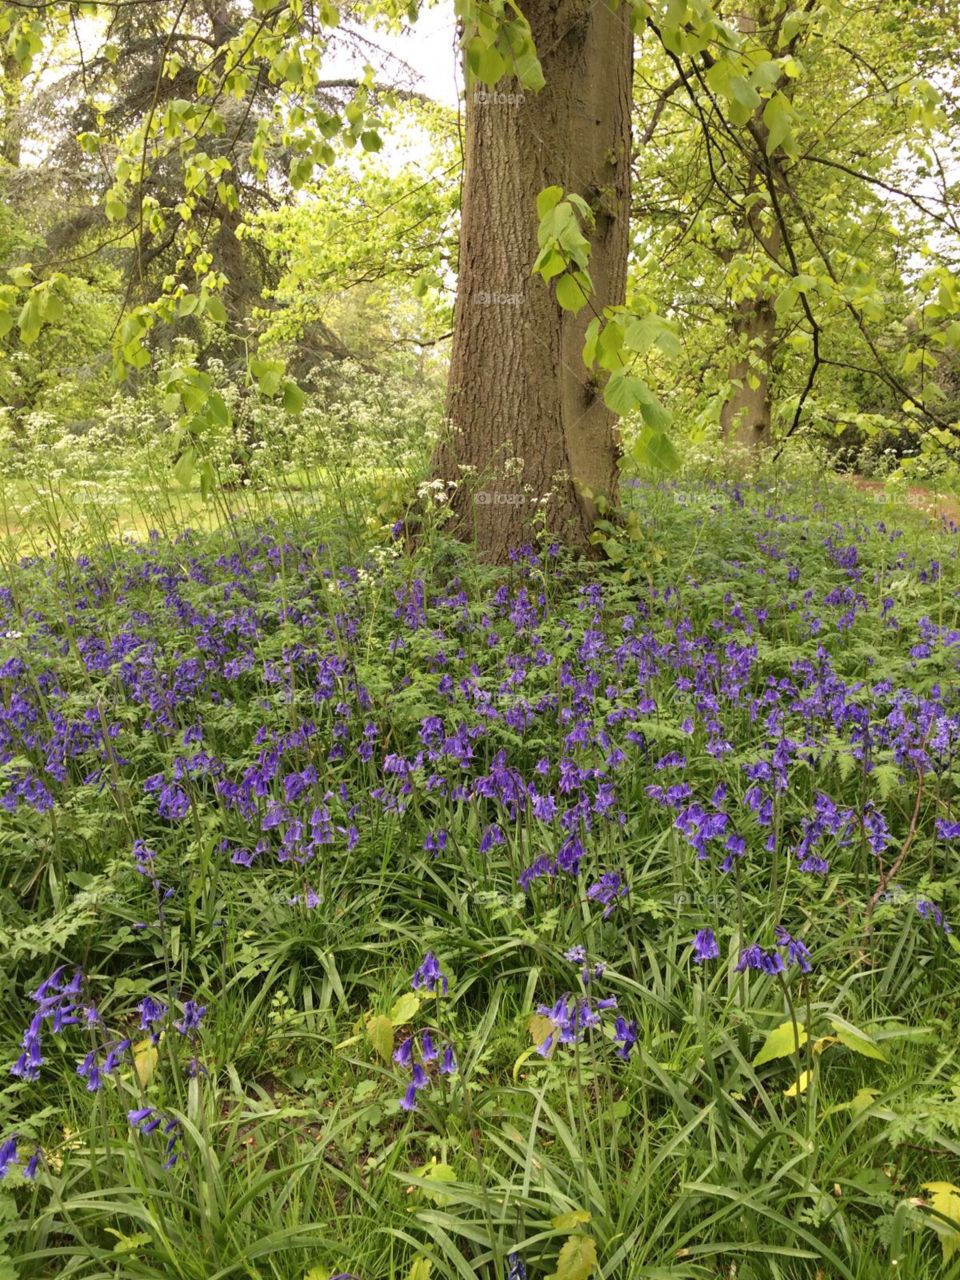 Delicious bluebells in the ancient forests 